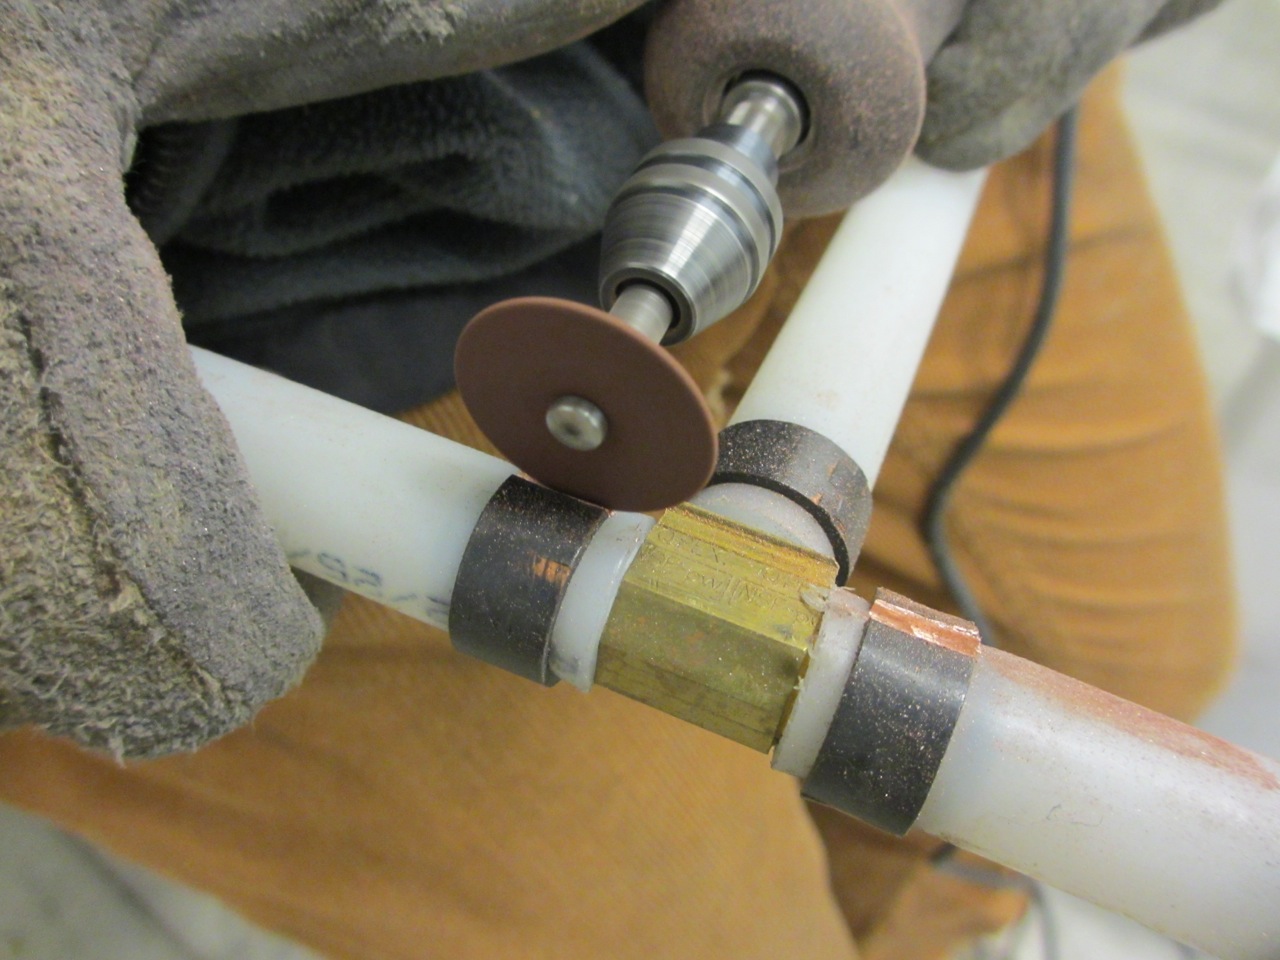  We used a Dremel to cut off all the copper clamps from the water pipes so we could remove and reuse the brass fittings. 